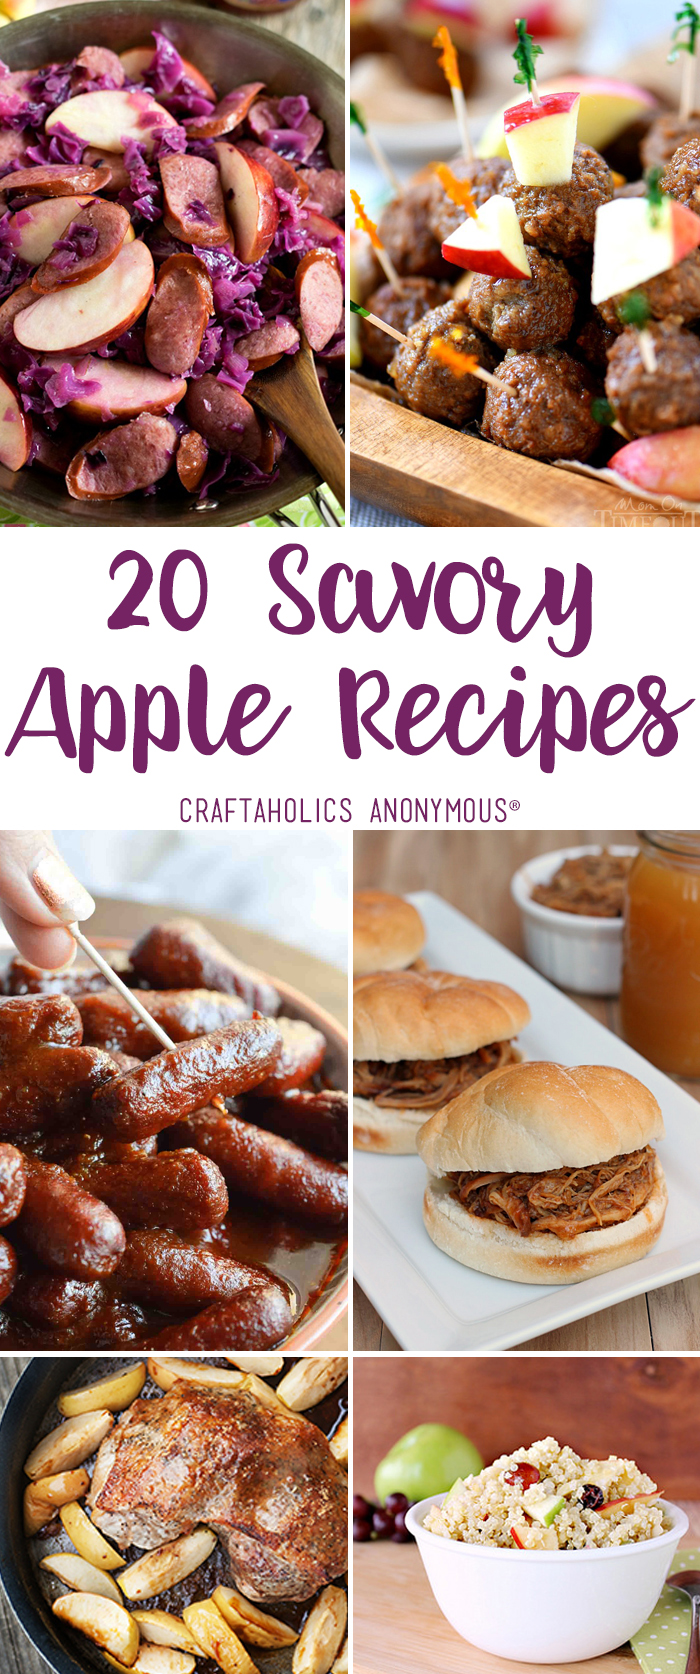 20 Savory Apple Recipes for Fall | craftaholicsanonymous.net